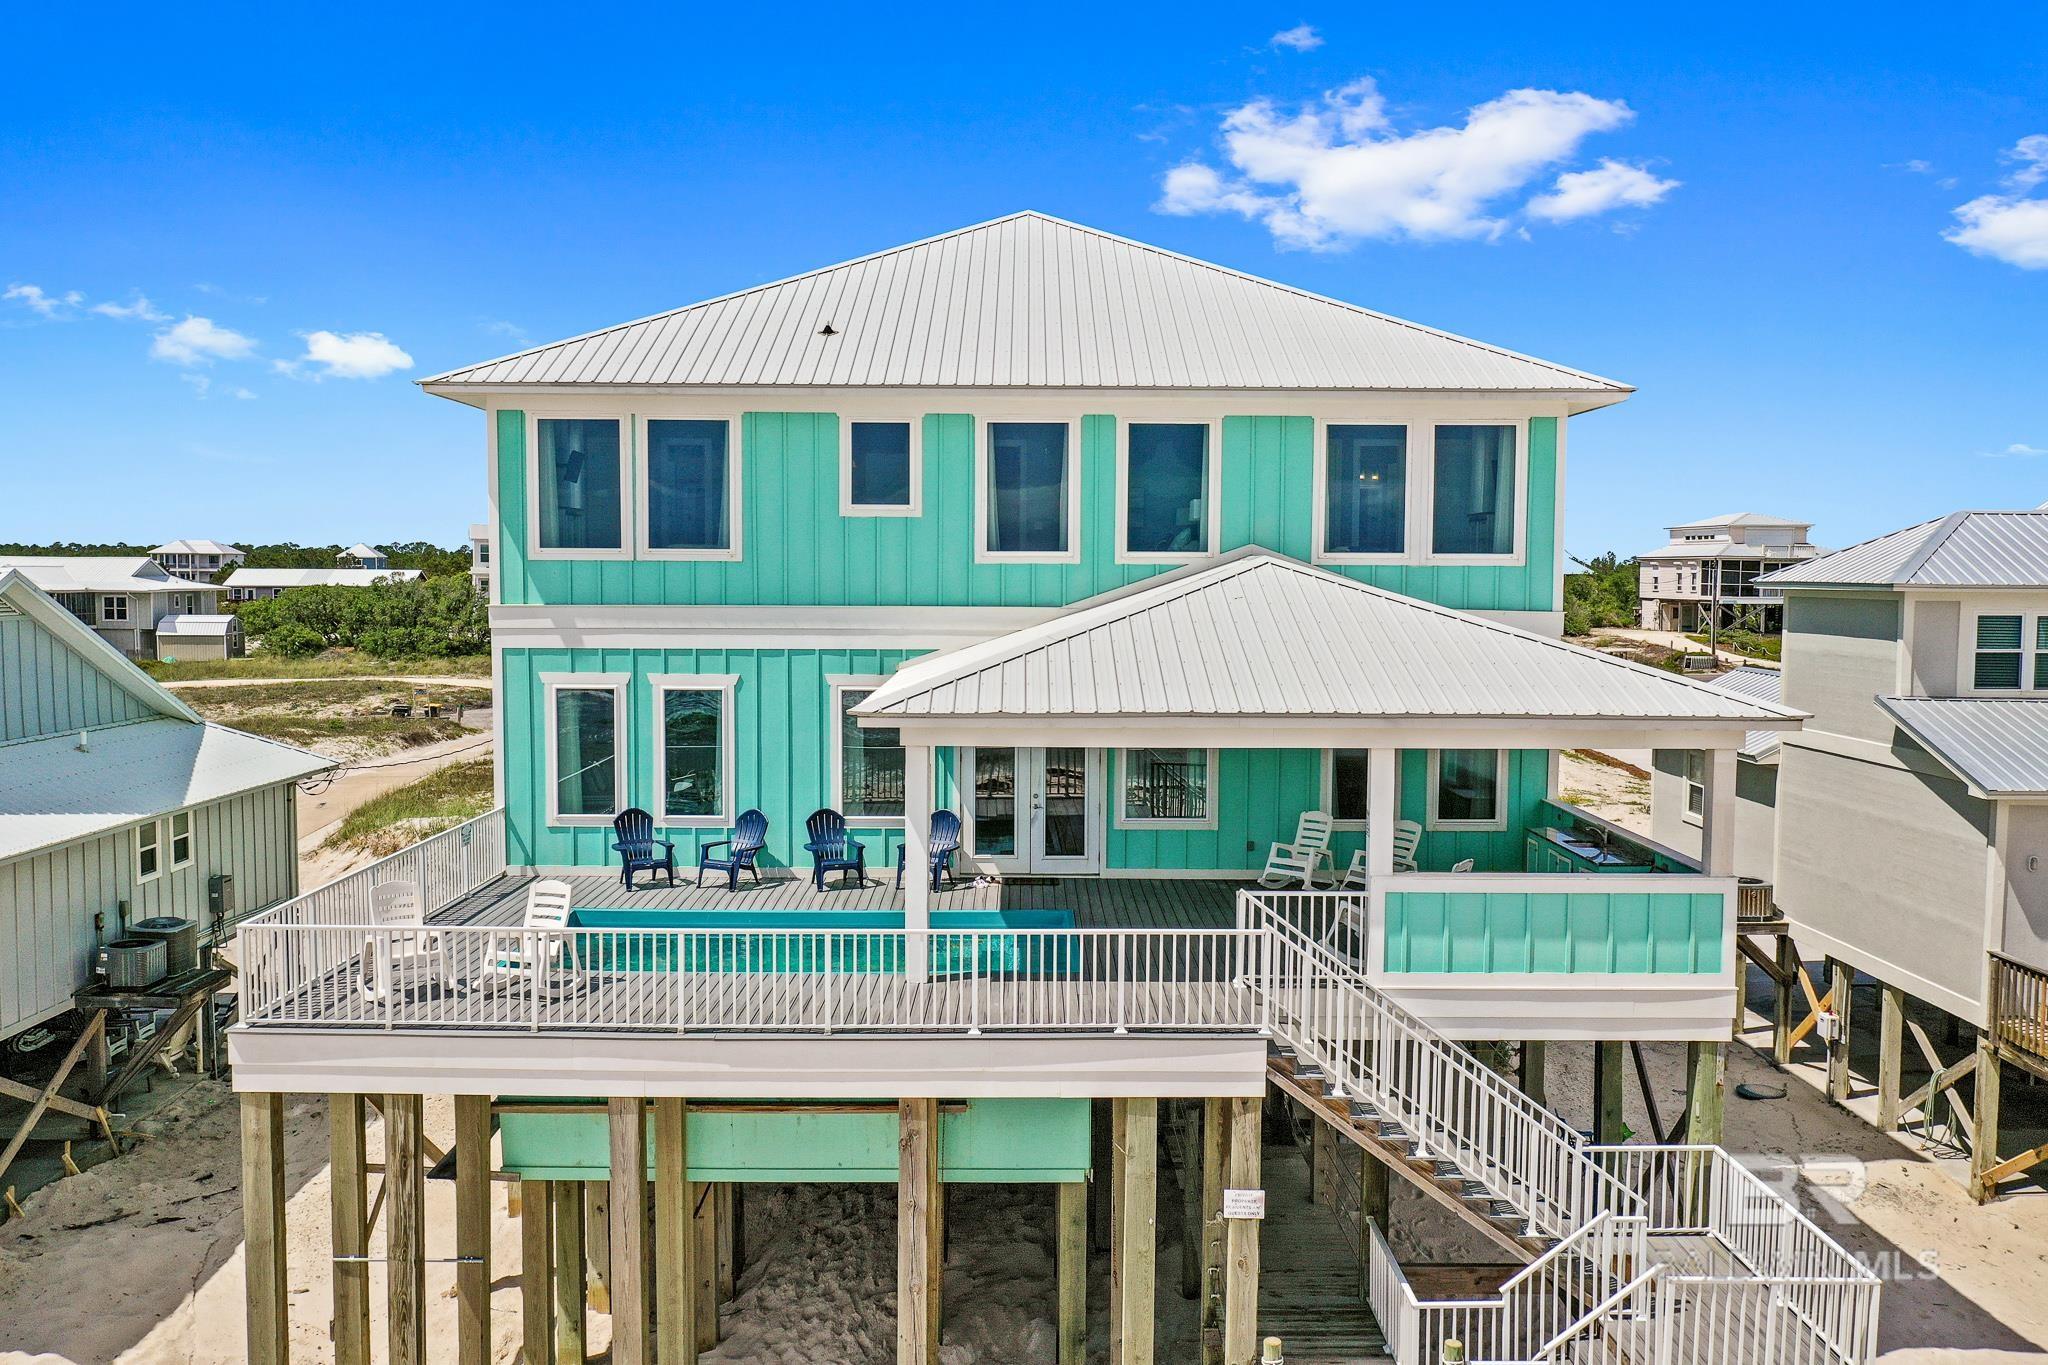 EXTRAORDINARY Gulf Front Beach House with tremendous rental income potential of more than $320k/yr! Gold Fortified construction situated on 70' of pristine beach with an outstanding floorplan, designed for maximum occupancy. This turn-key investment already has $243k on the books for 2023 (includes numerous owner blocks). There are 8 bedrooms (4 are gulf front) and 8 nicely appointed bathrooms with granite counters and upscale tiled showers (& 2 extra 1/2 baths). Huge main living area and fabulous overall amenities including a private heated pool and nice elevator! Wide open, elegant kitchen with Wolf, Kitchen-Aid and Maytag appliances includes 2 refrigerators, 2 dishwashers, double oven, microwave and separate icemaker.  Additional upstairs gathering space and 2 separate laundry areas for added convenience. Plenty of parking underneath and perfect outdoor space for an afternoon shrimp boil. "Let The Good Tides Roll" is a money maker you can be proud to own and enjoy with family and friends. See docs for income info.